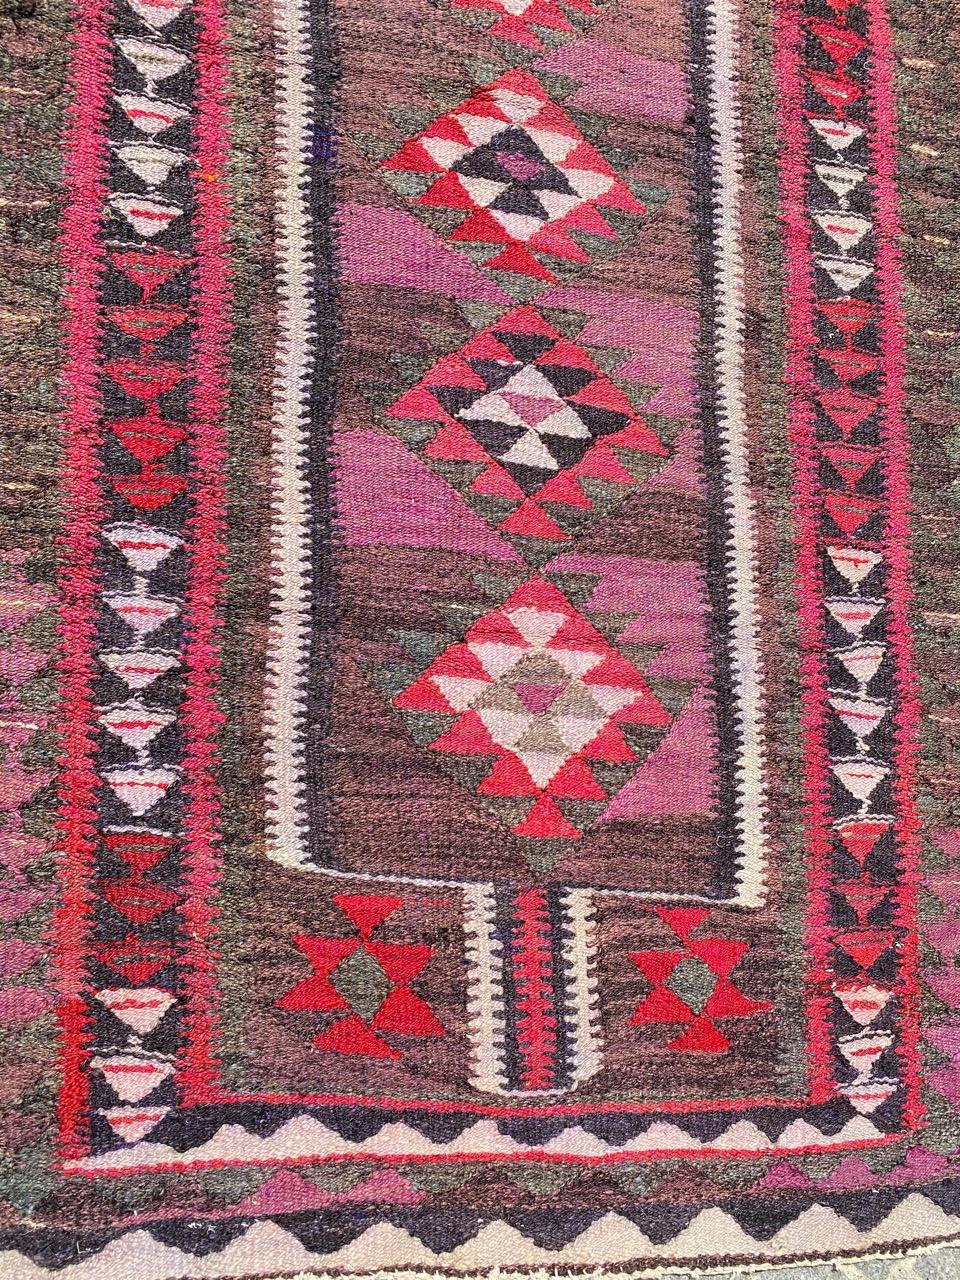 Nice mid century Turkish long Kilim with beautiful geometrical design and nice colors, entirely hand woven with wool on cotton foundation.

✨✨✨
